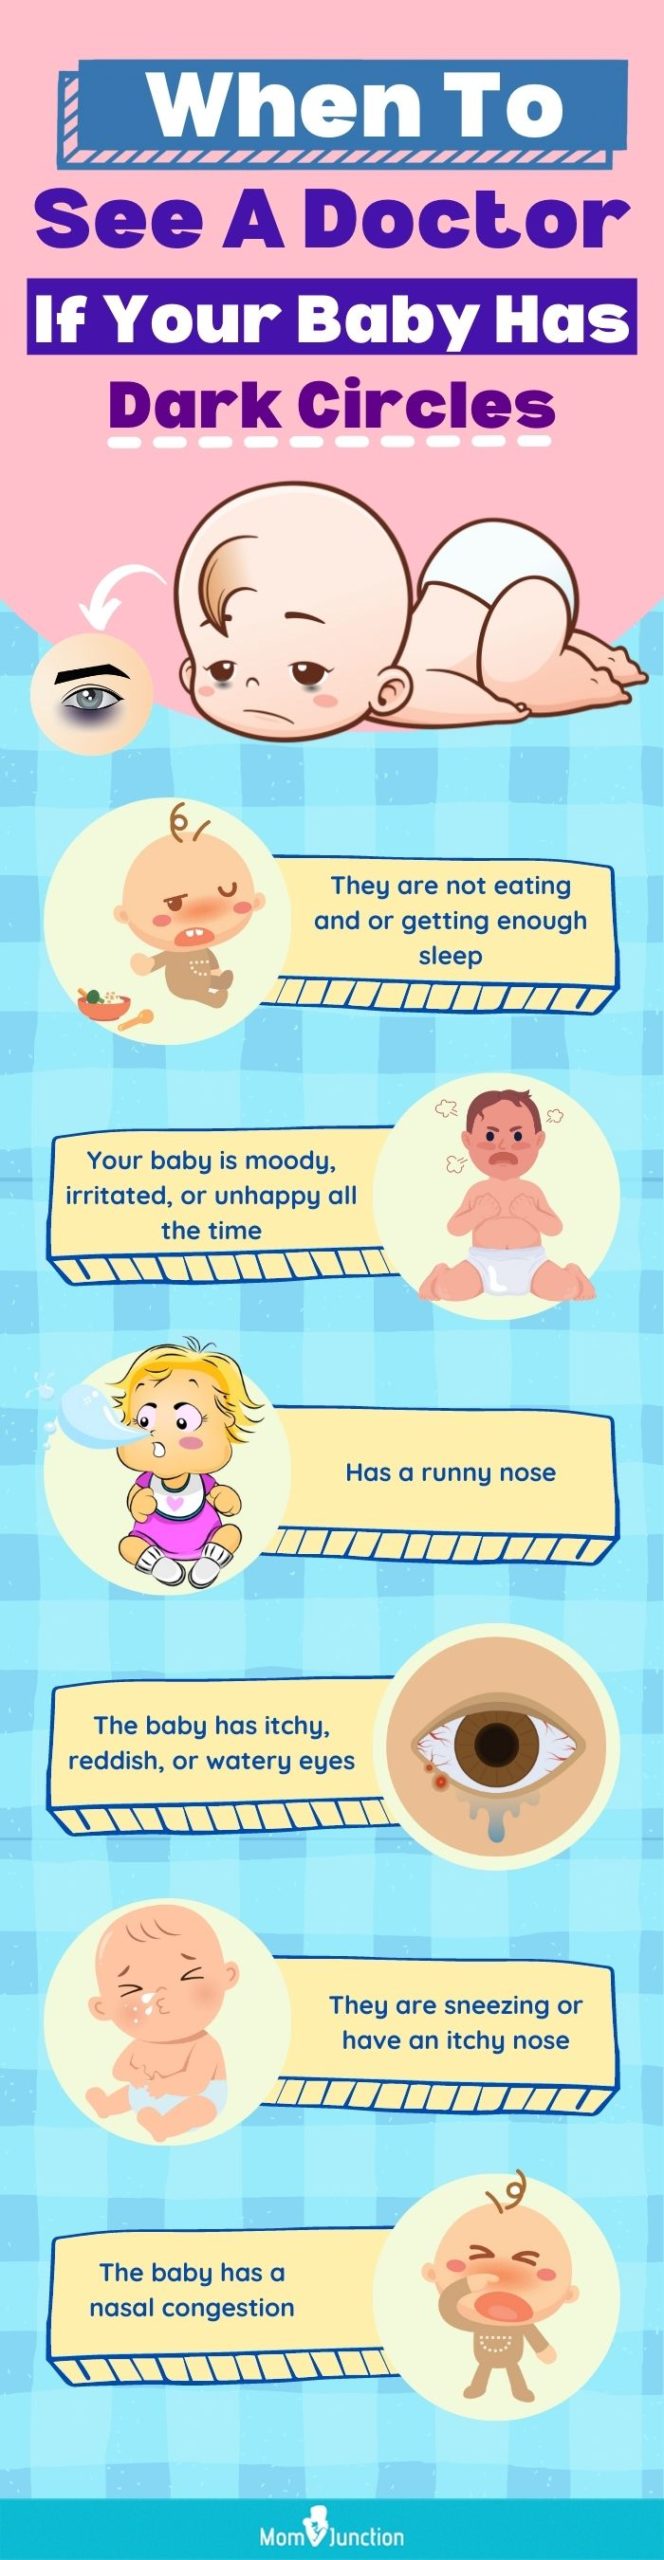 when to see a doctor if your baby has dark circles (infographic)